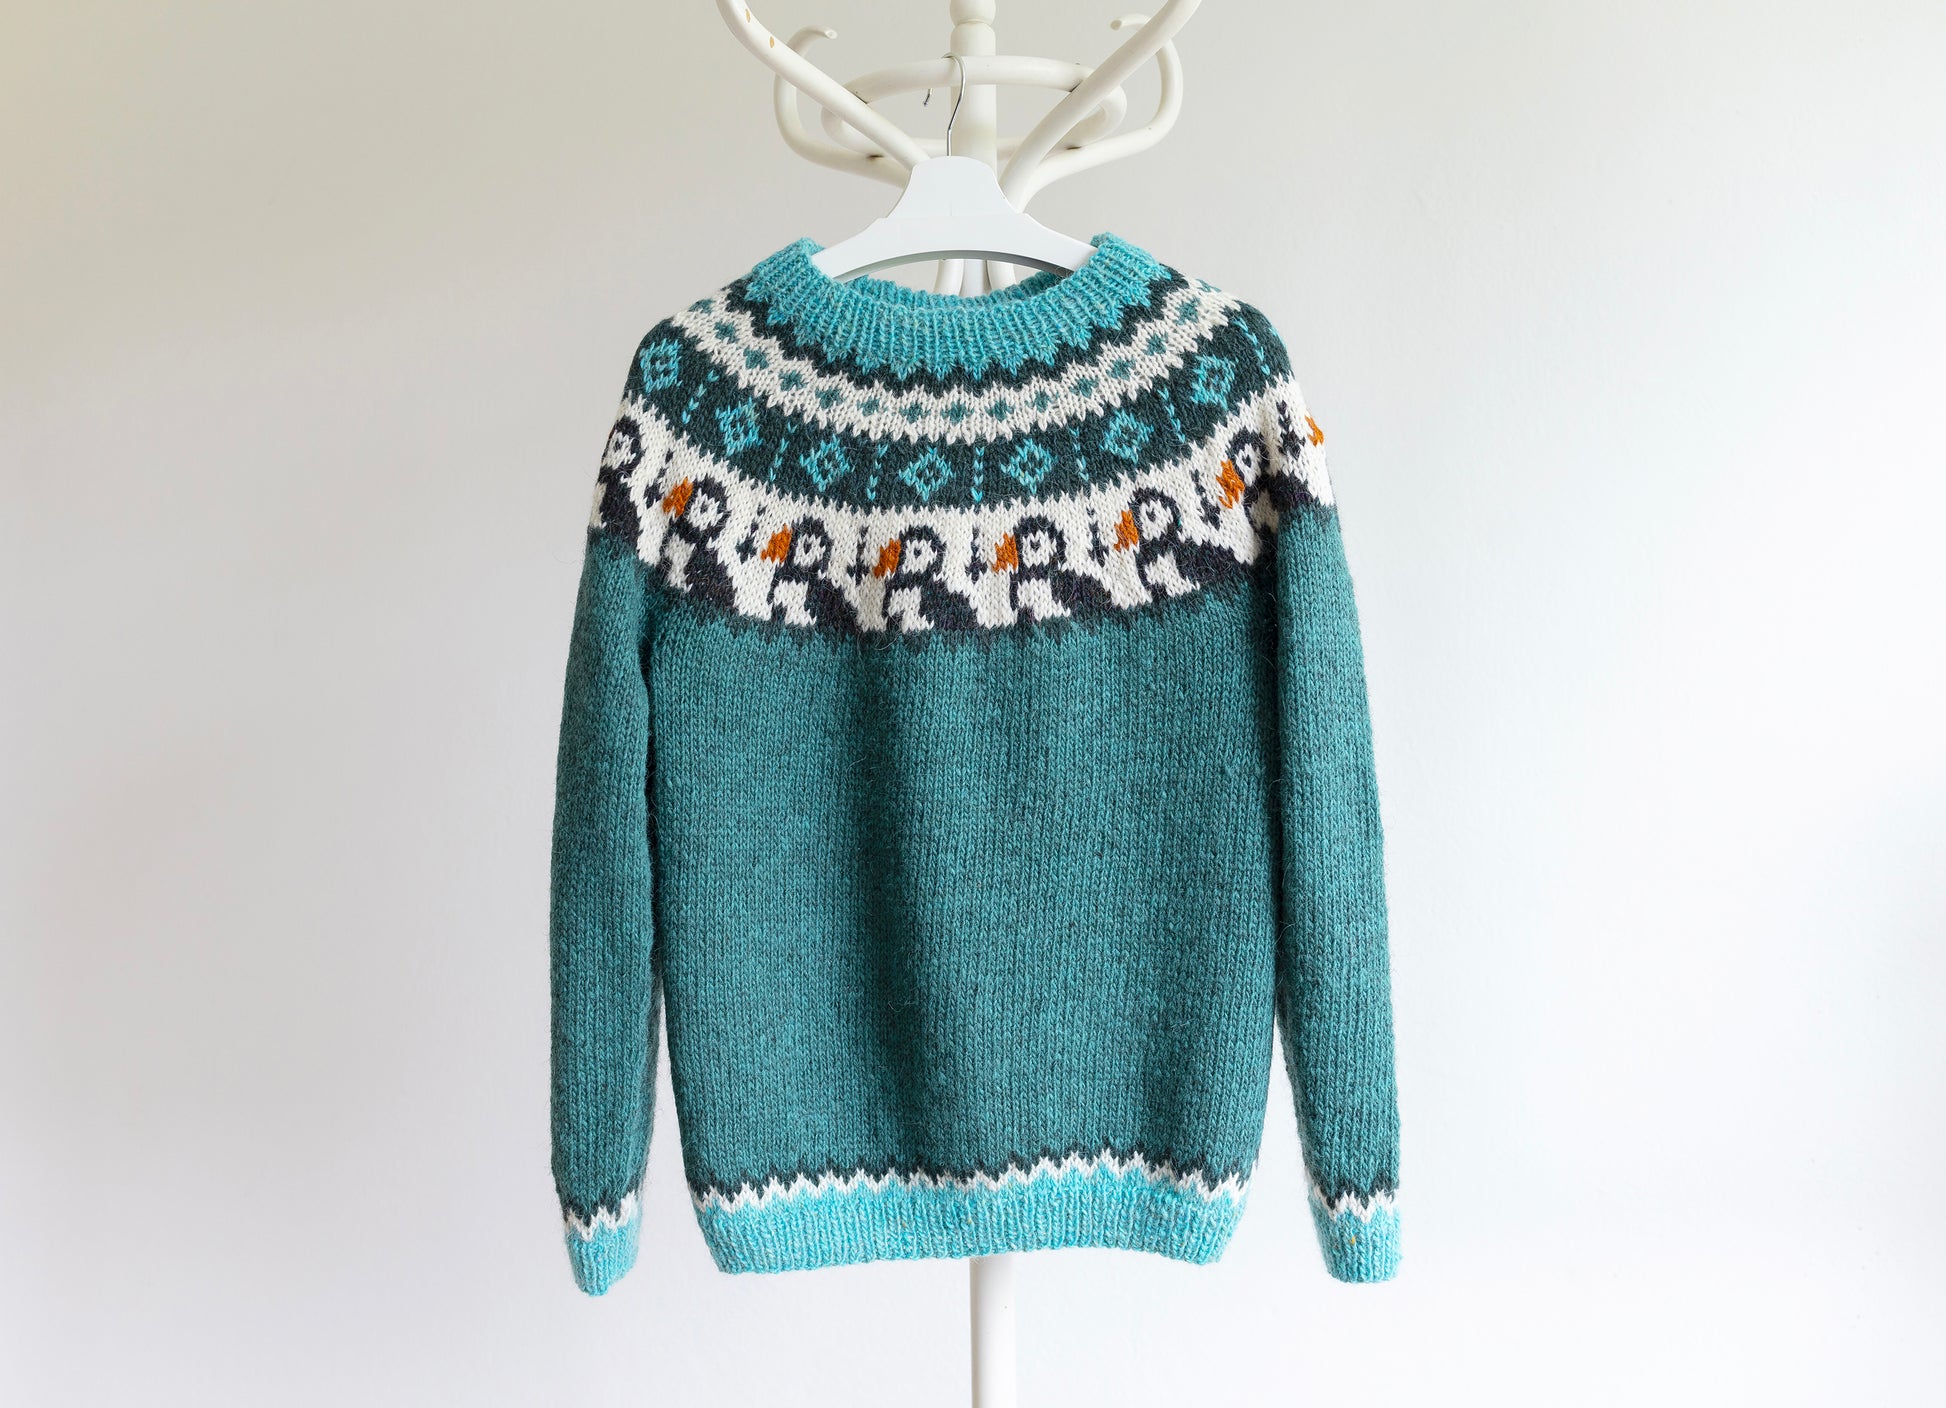 Turquoise, white and black pure Icelandic wool hand-knitted lopapeysa sweater in Puffins knitting pattern